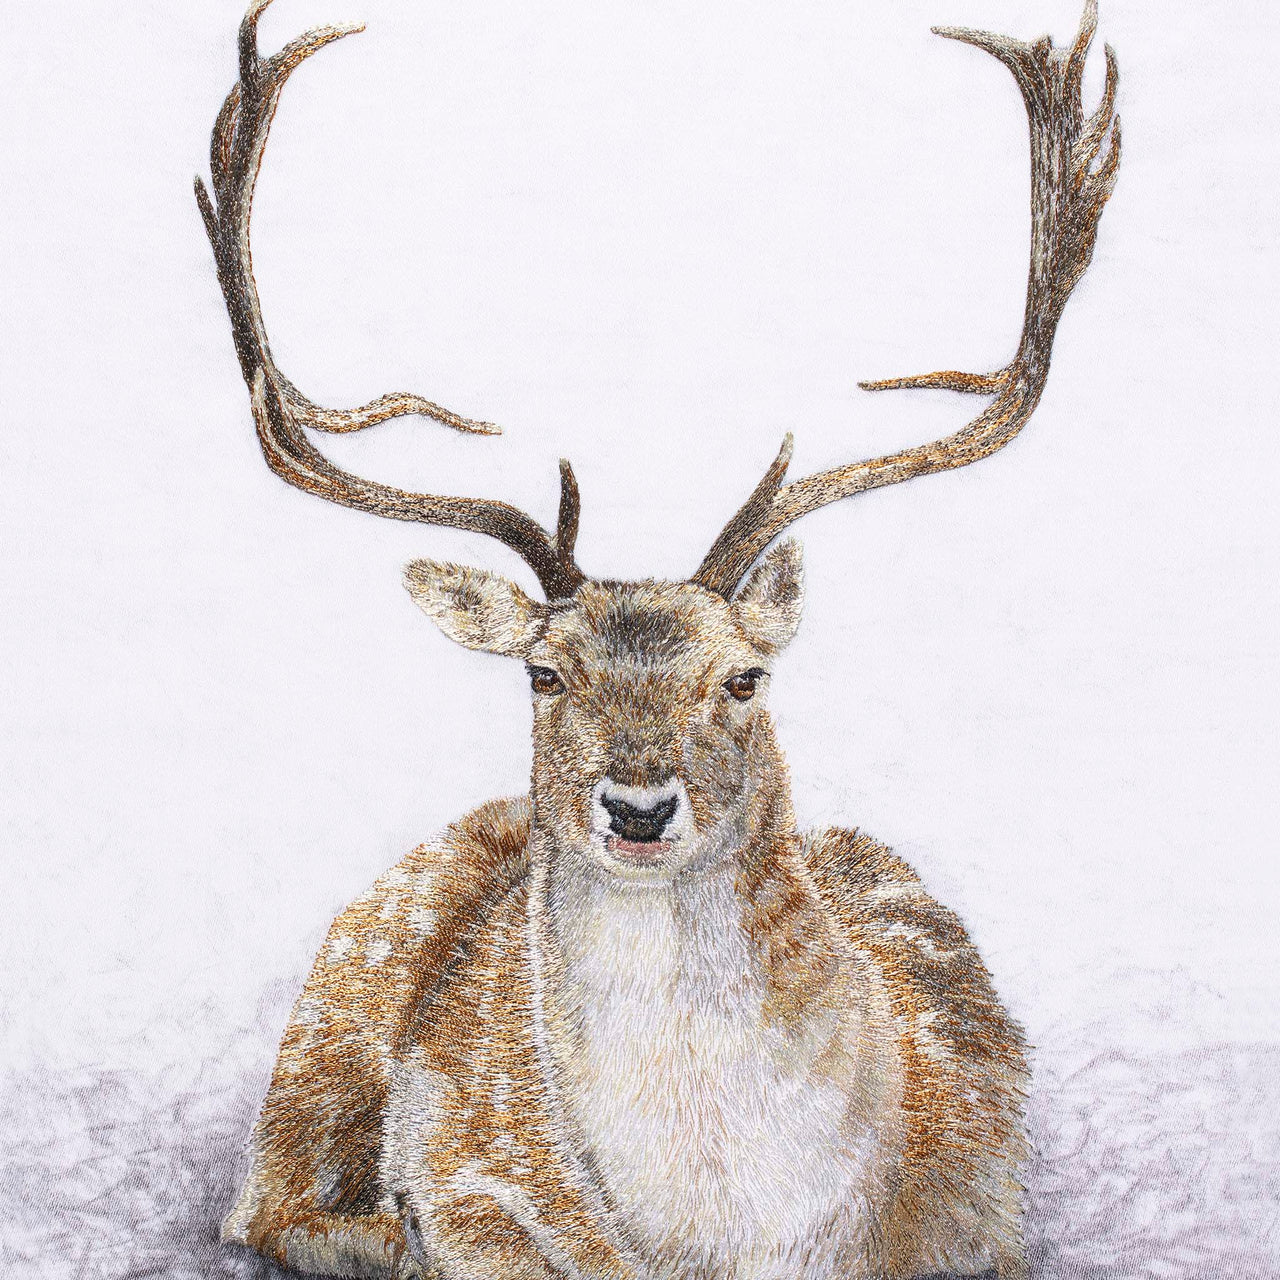 Hand embroidered siting deer limited edition print